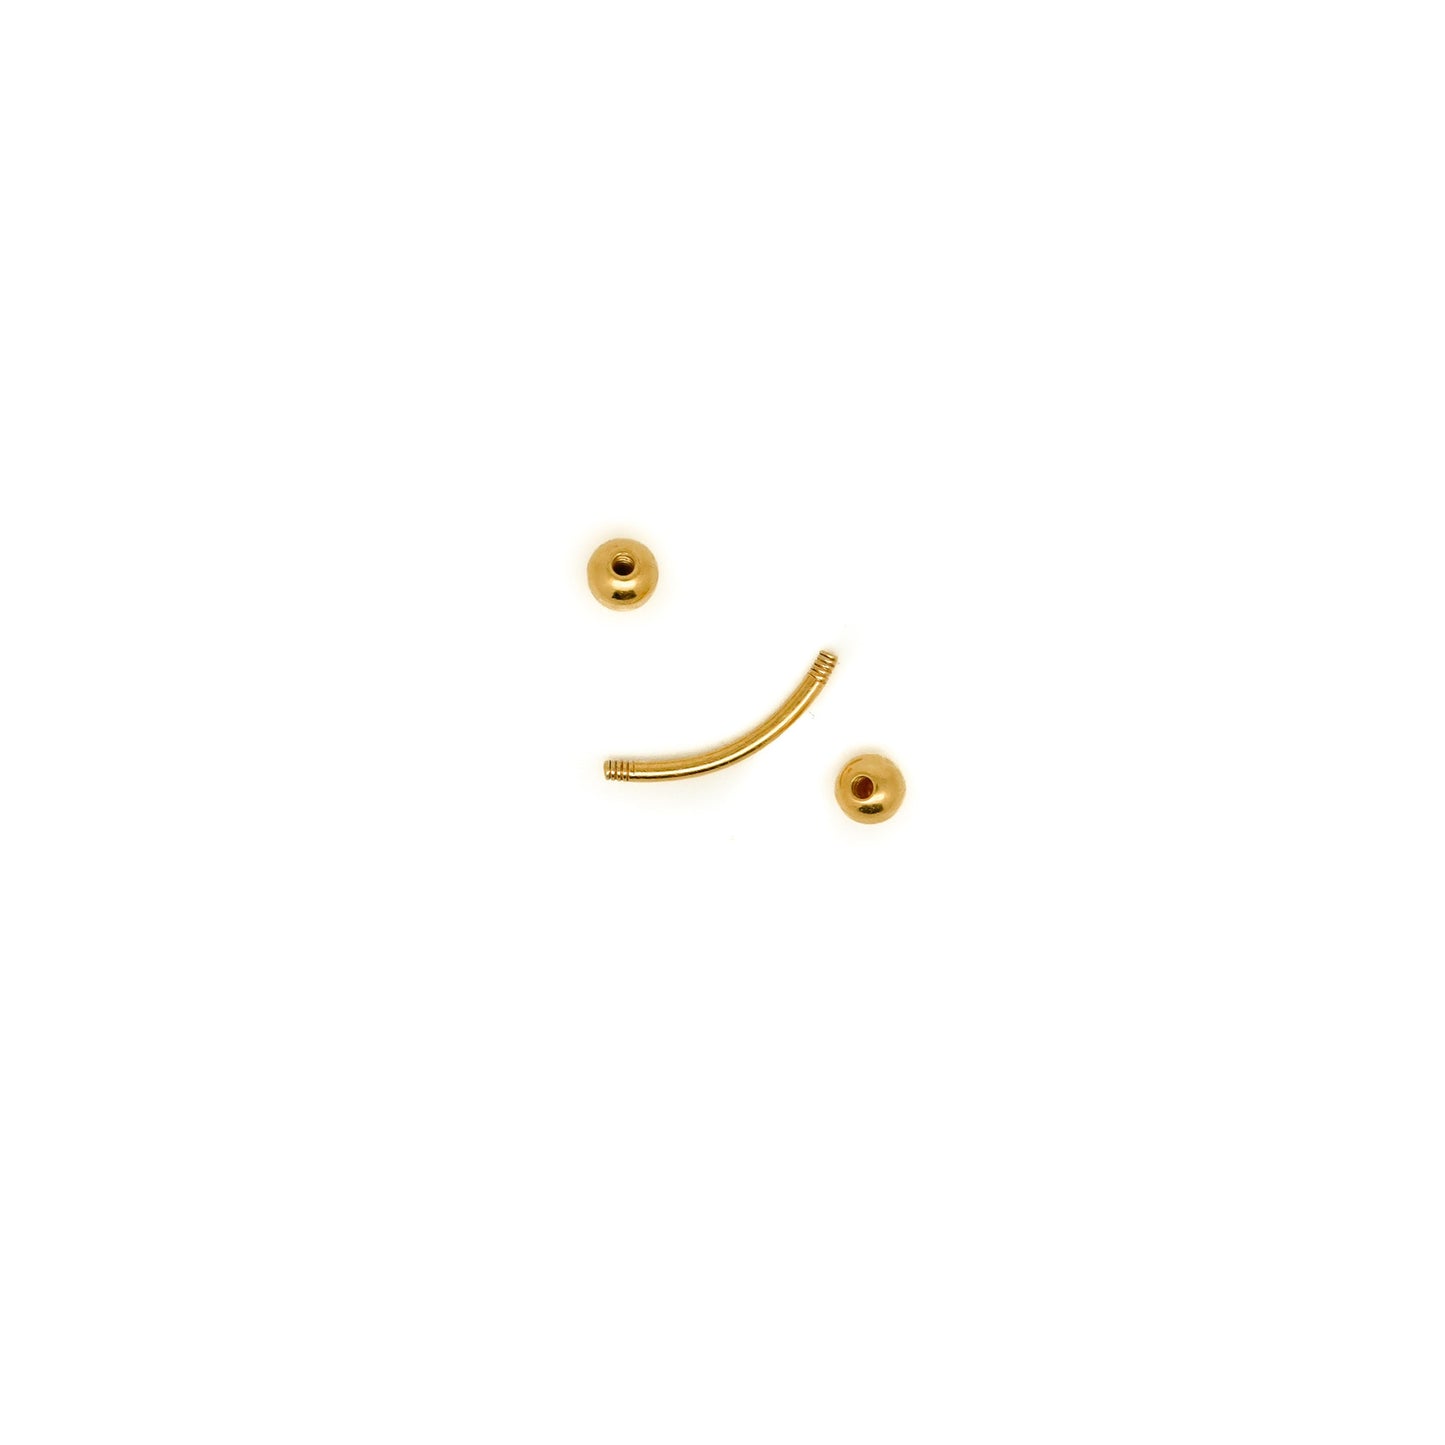 24K Gold Vermeil | 925 Silver 24k Gold Coated 20G Curved Barbell Rook Piercing | Snug | Eyebrow | Cartilage | 5mm 7mm - Sturdy South